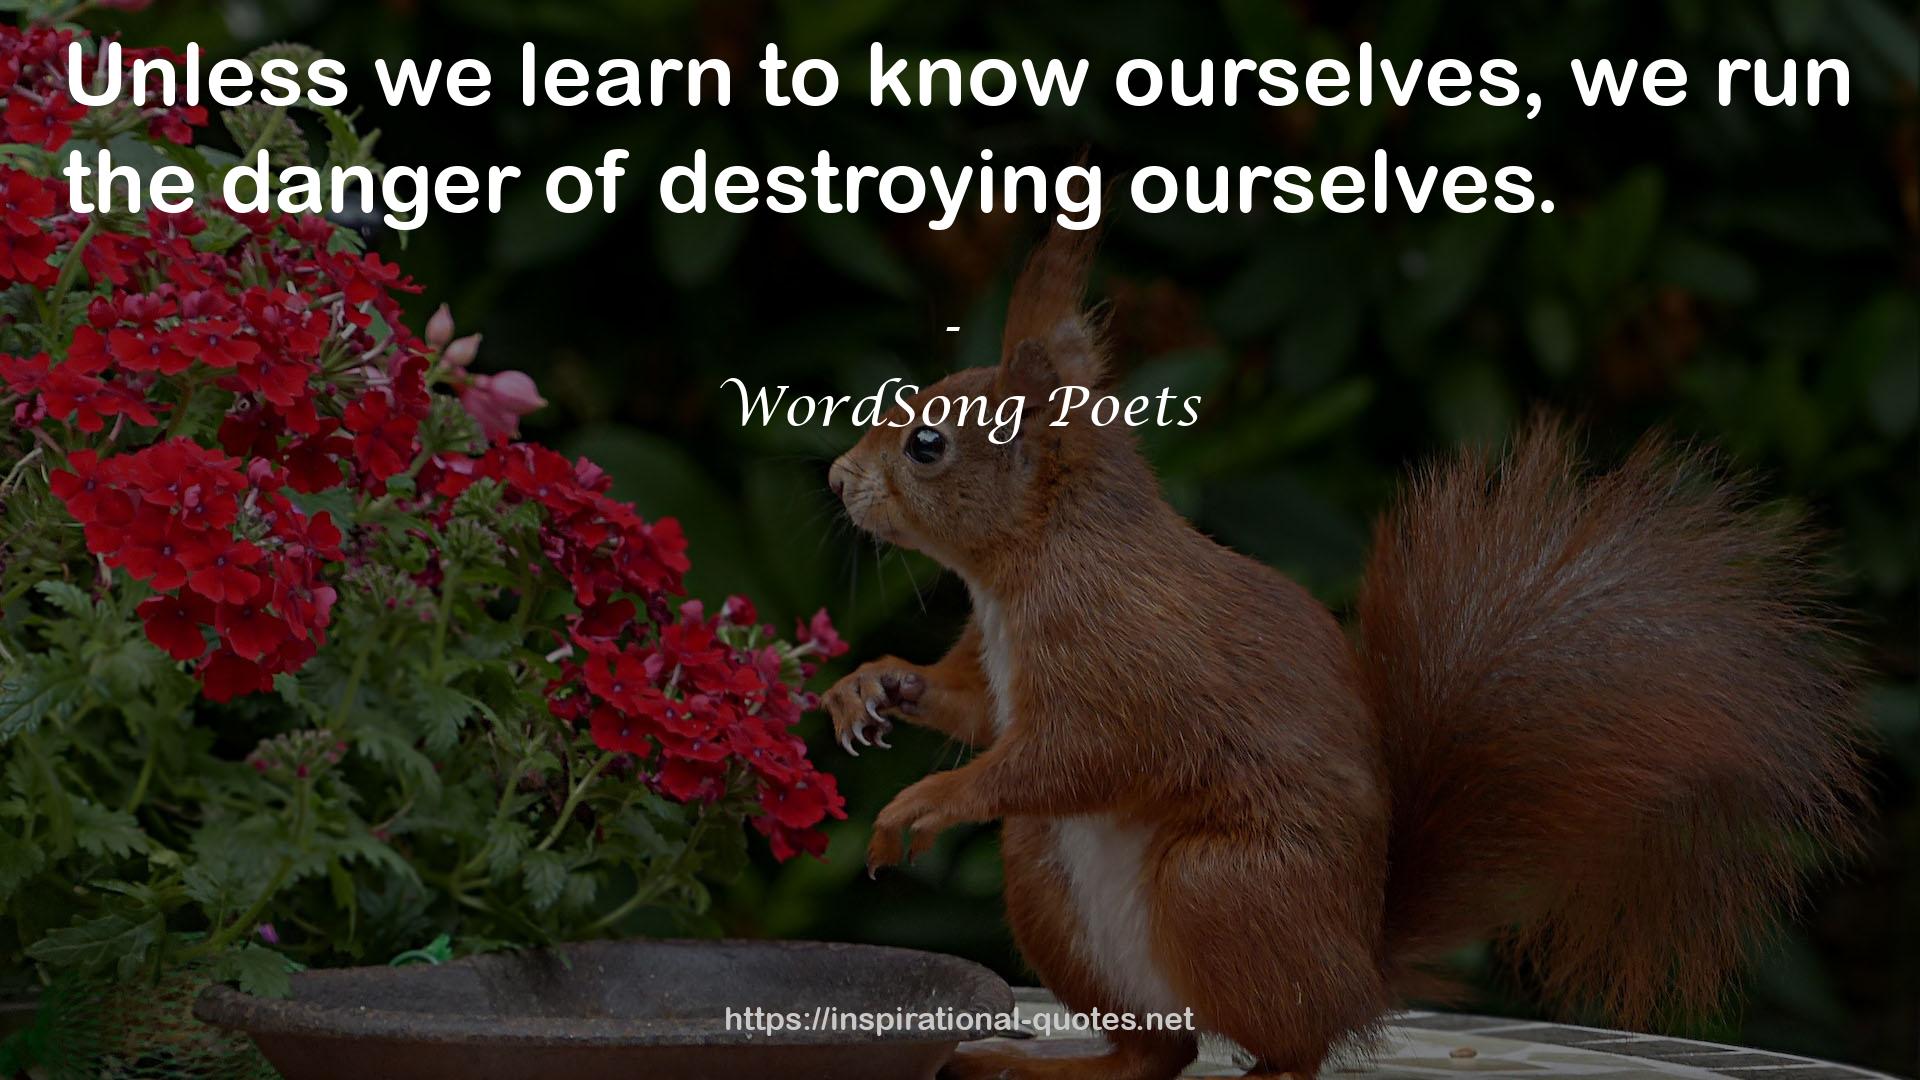 WordSong Poets QUOTES